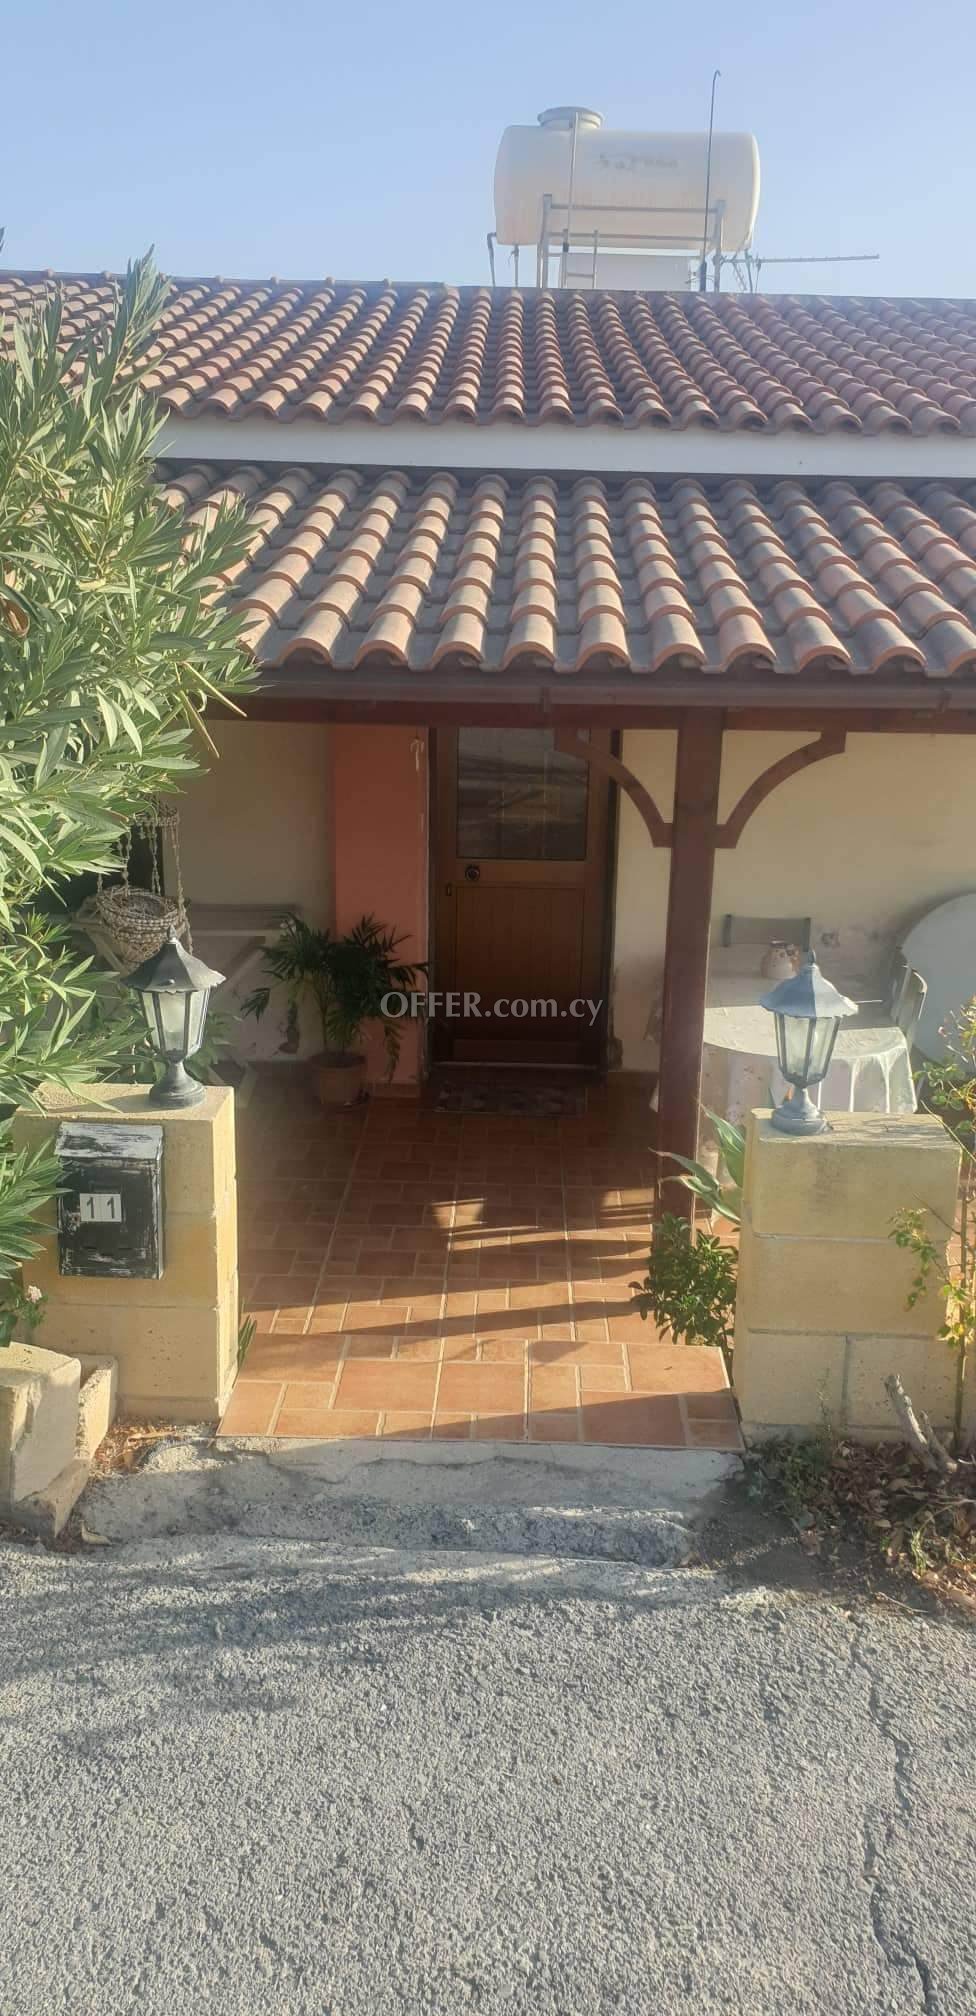 New For Sale €135,000 House (1 level bungalow) 2 bedrooms, Alethriko Larnaca - 9